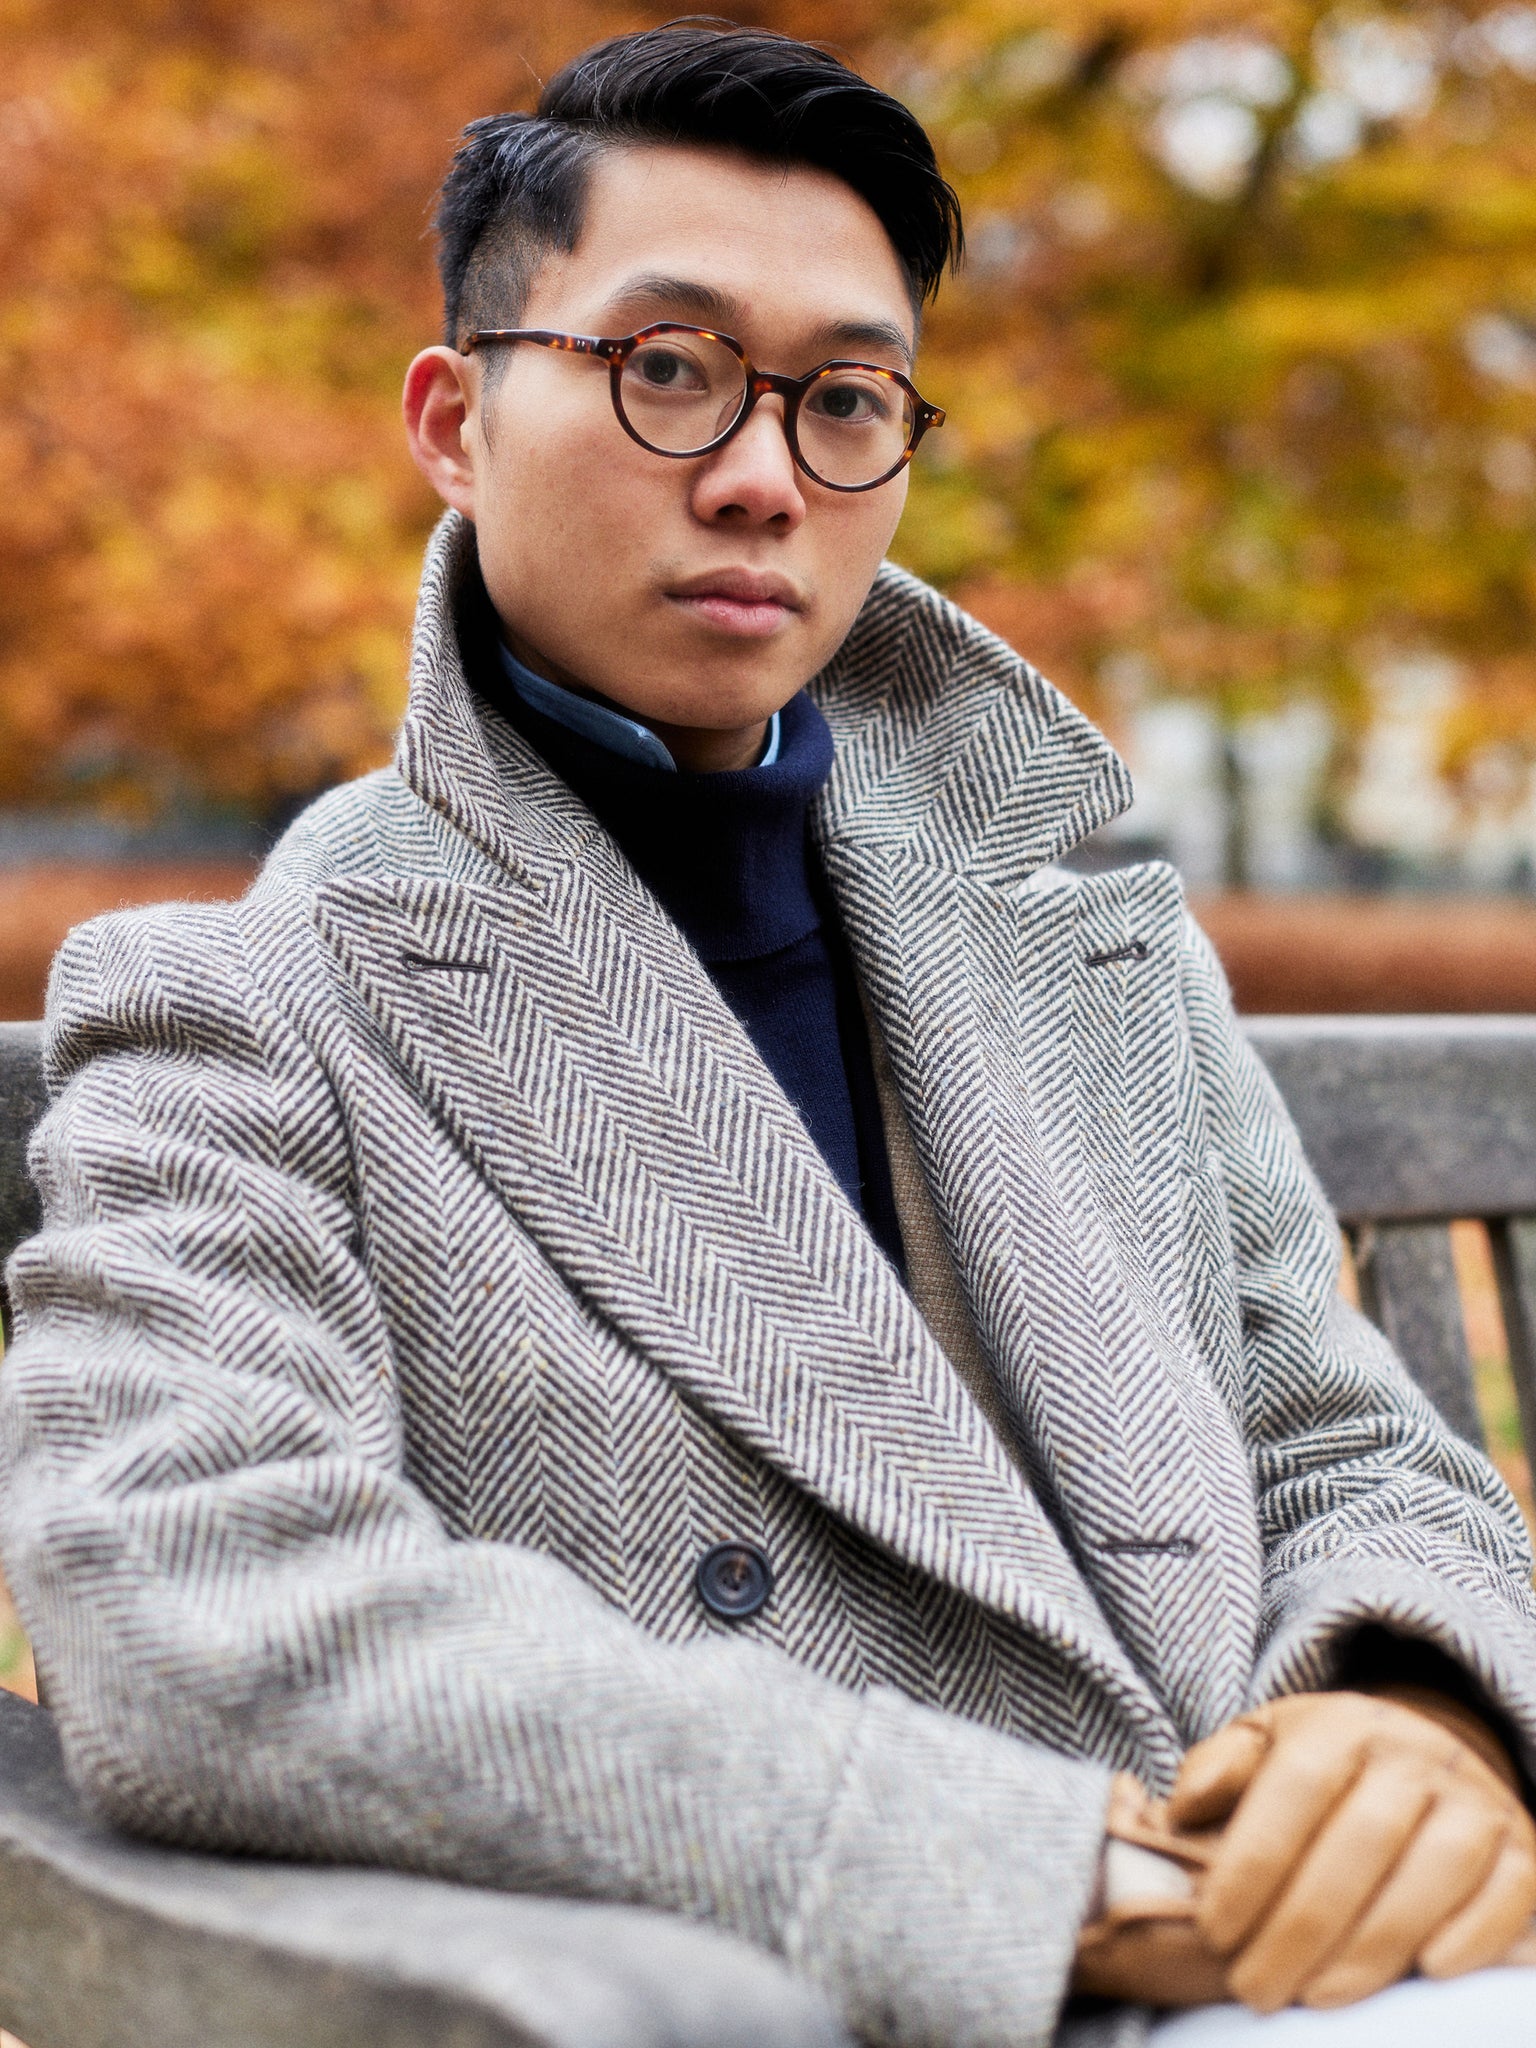 Buzz Tang wearing a grey coat that is a collaboration between his brand The Anthology and Permanent Style, interviewed by A Collected Man London